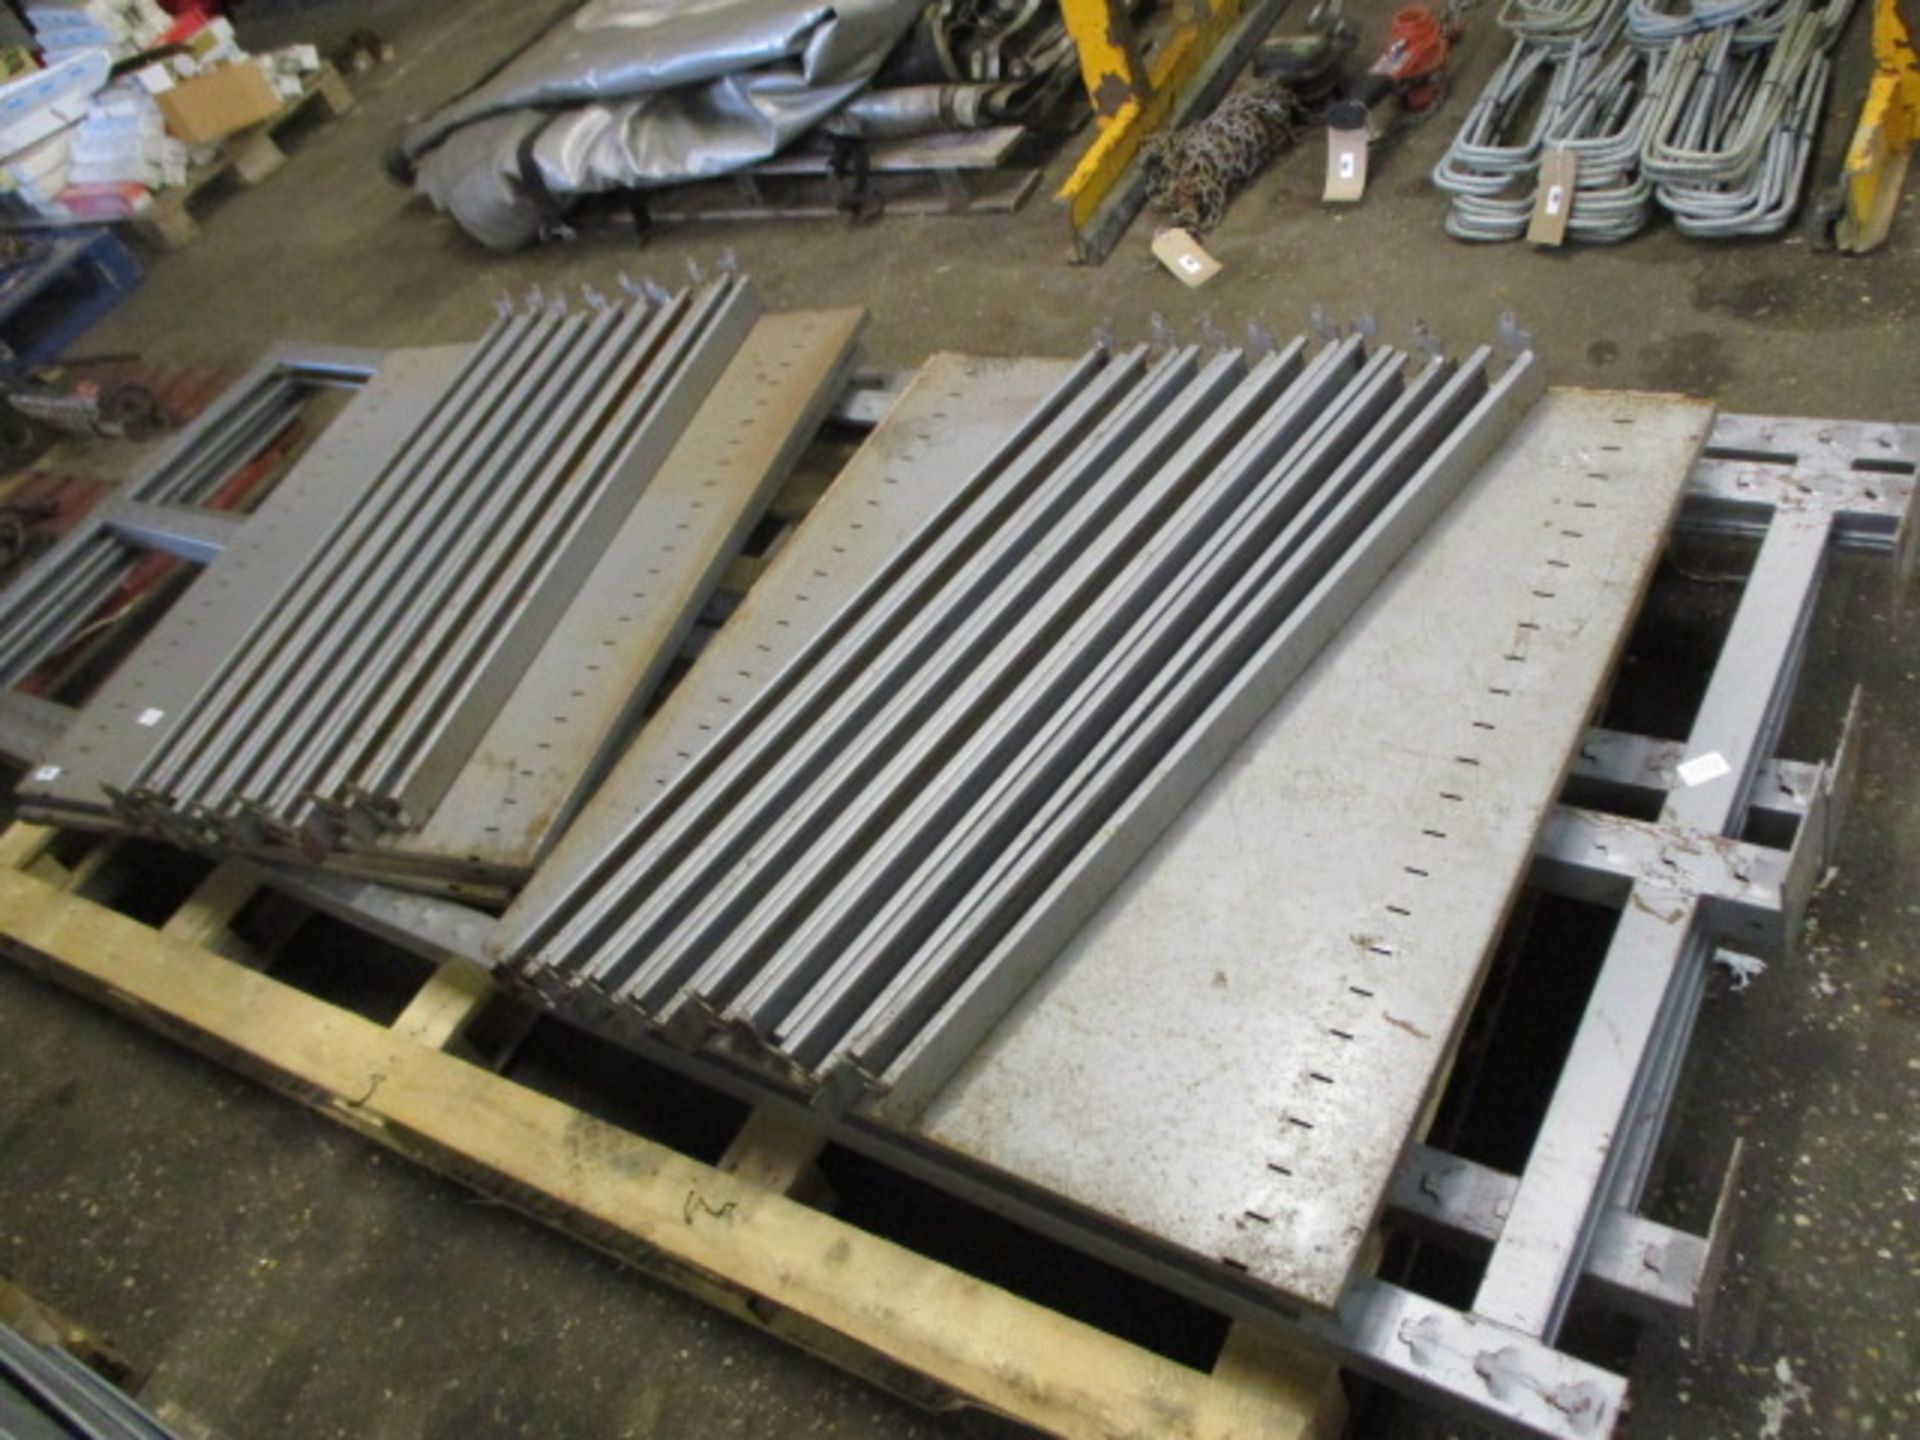 Pallet of bolt less racking incl. 2 uprights with associated horizontal beams and shelves - Image 2 of 2